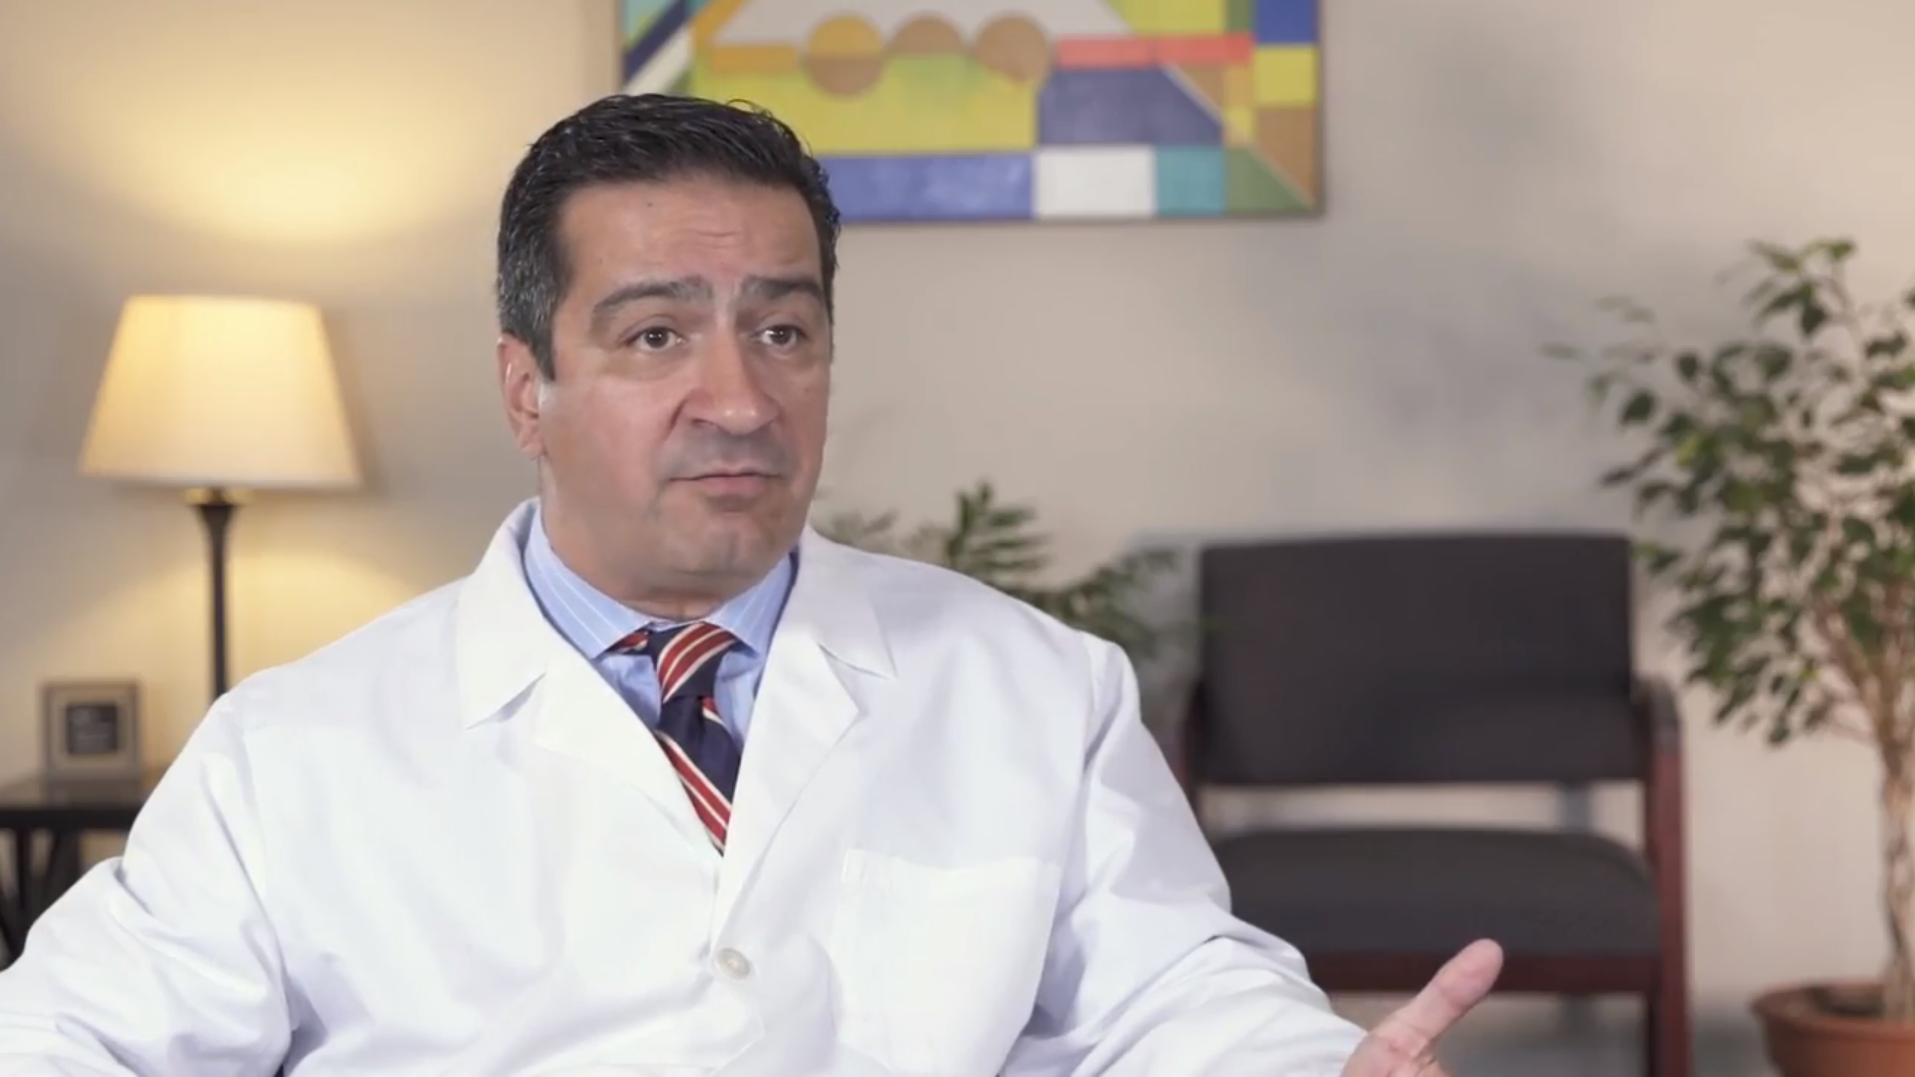 Dr. Samiei explains how we wants his patients to be happy